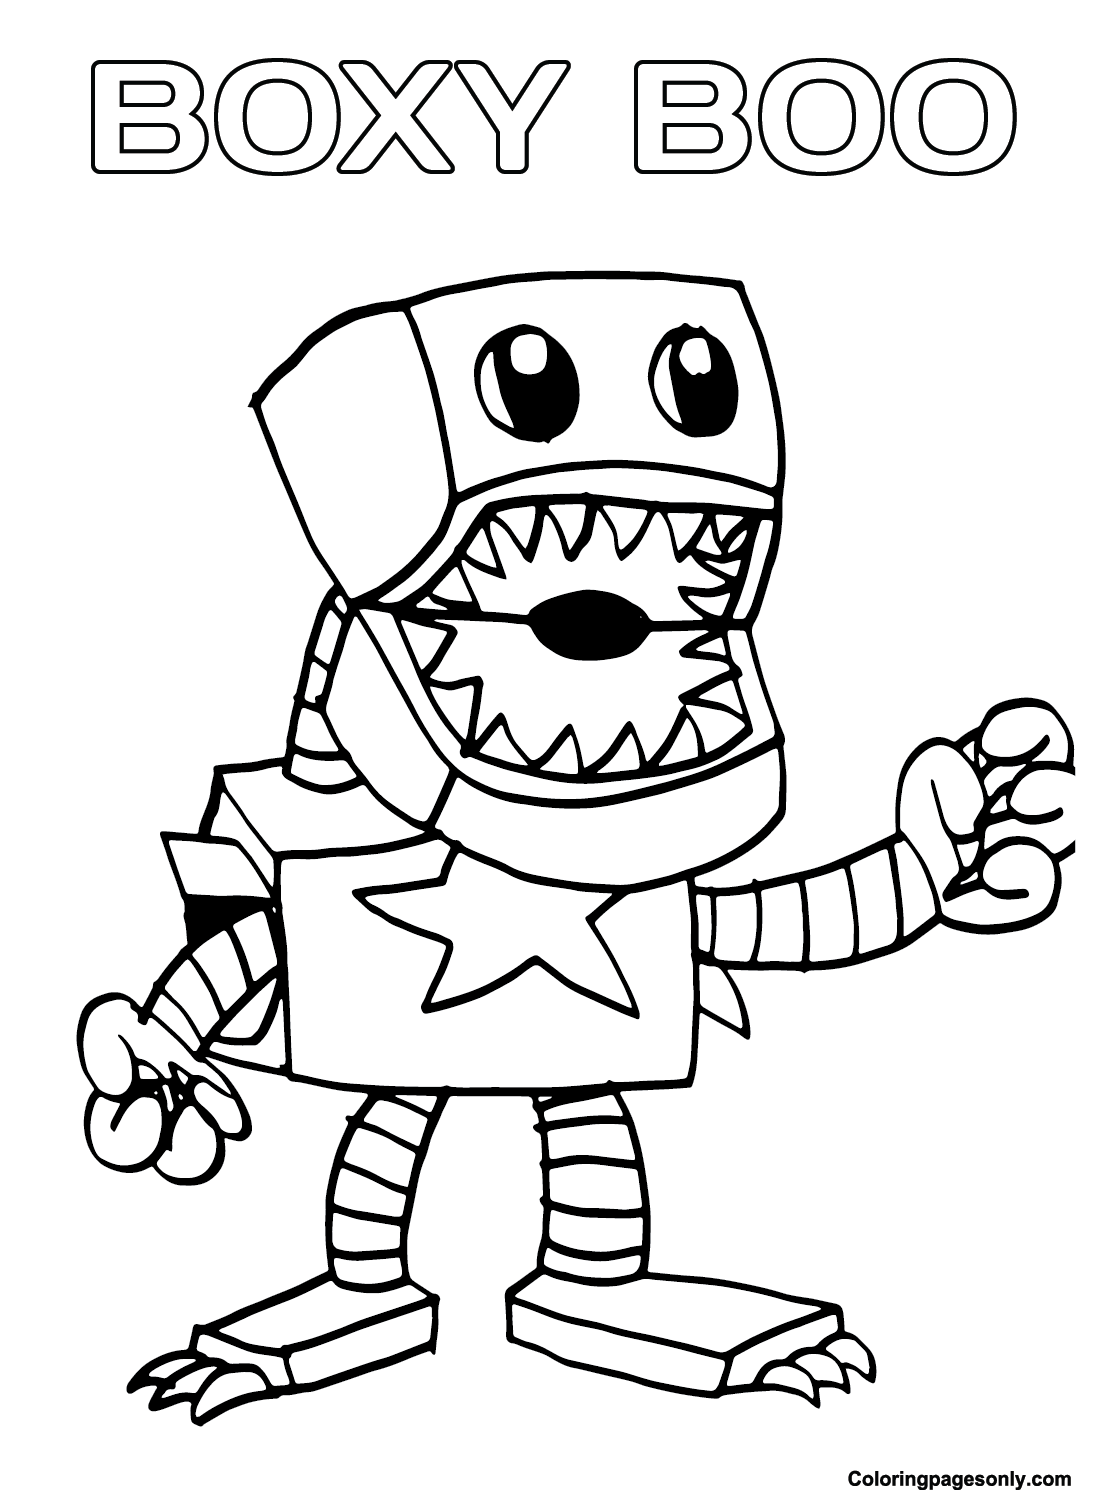 Boxy Boo Images Coloring Pages